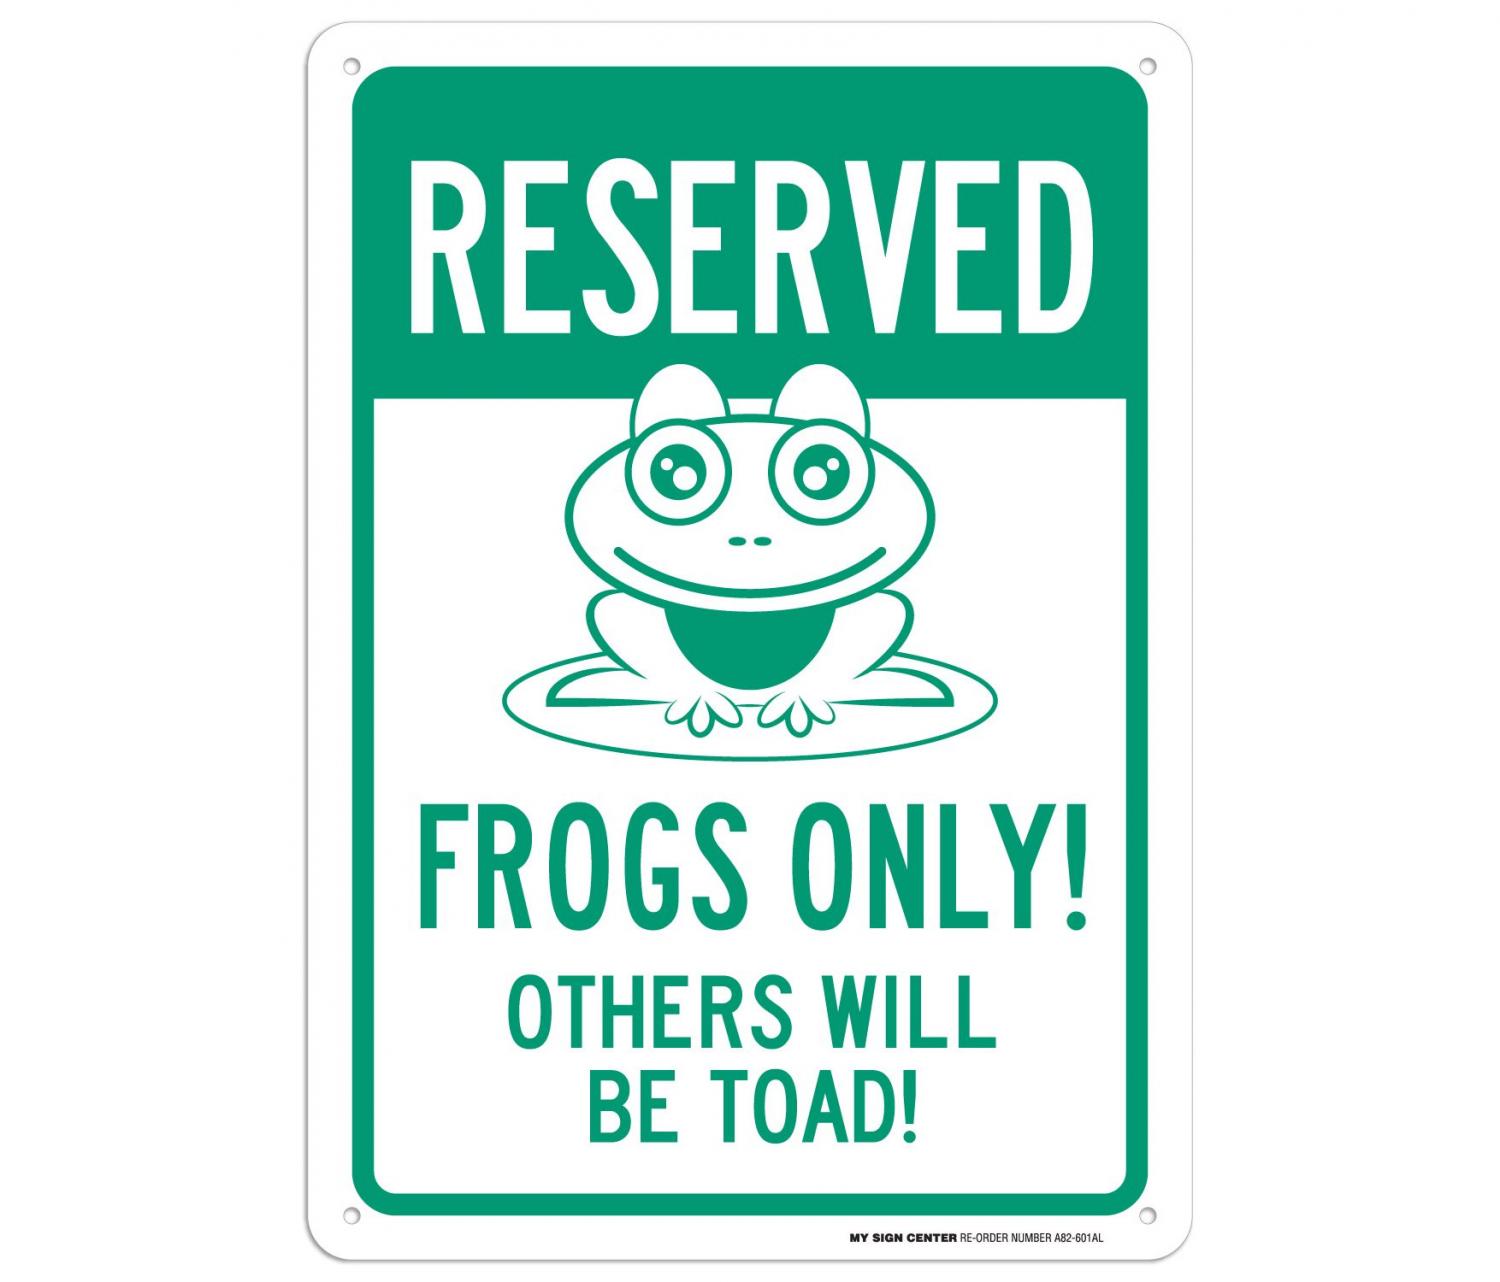 Frog Parking Only Violators Will Be Toad Sign